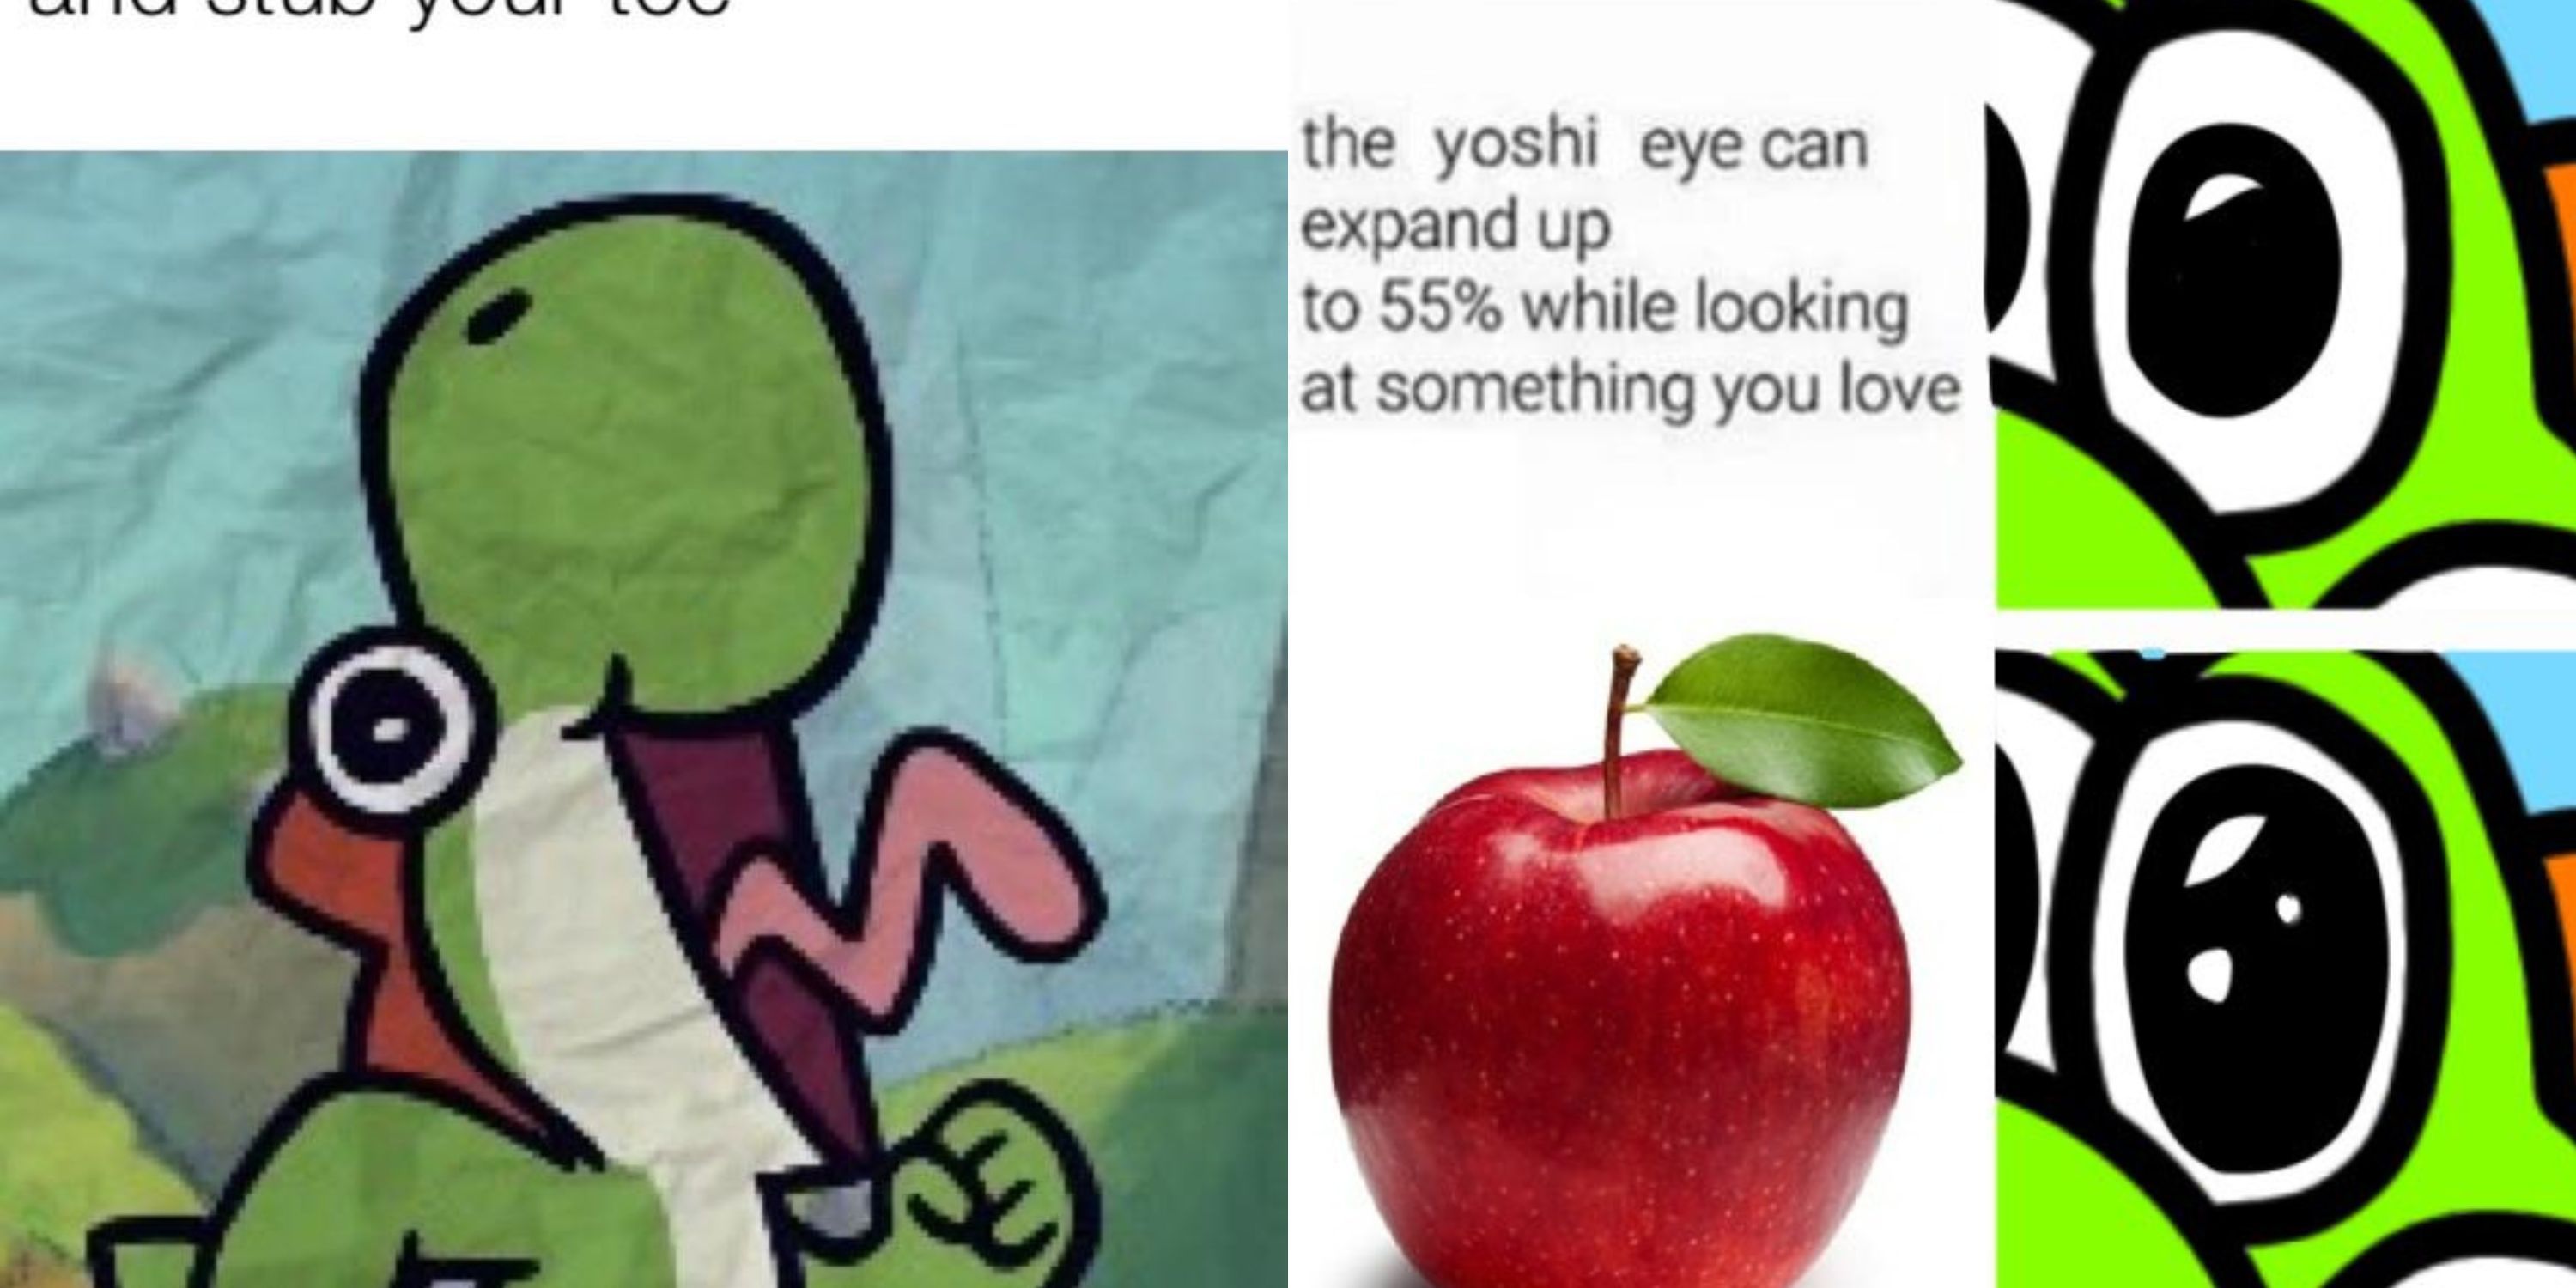 Featured image screaming Yoshi and a meme about Yoshi love for apples